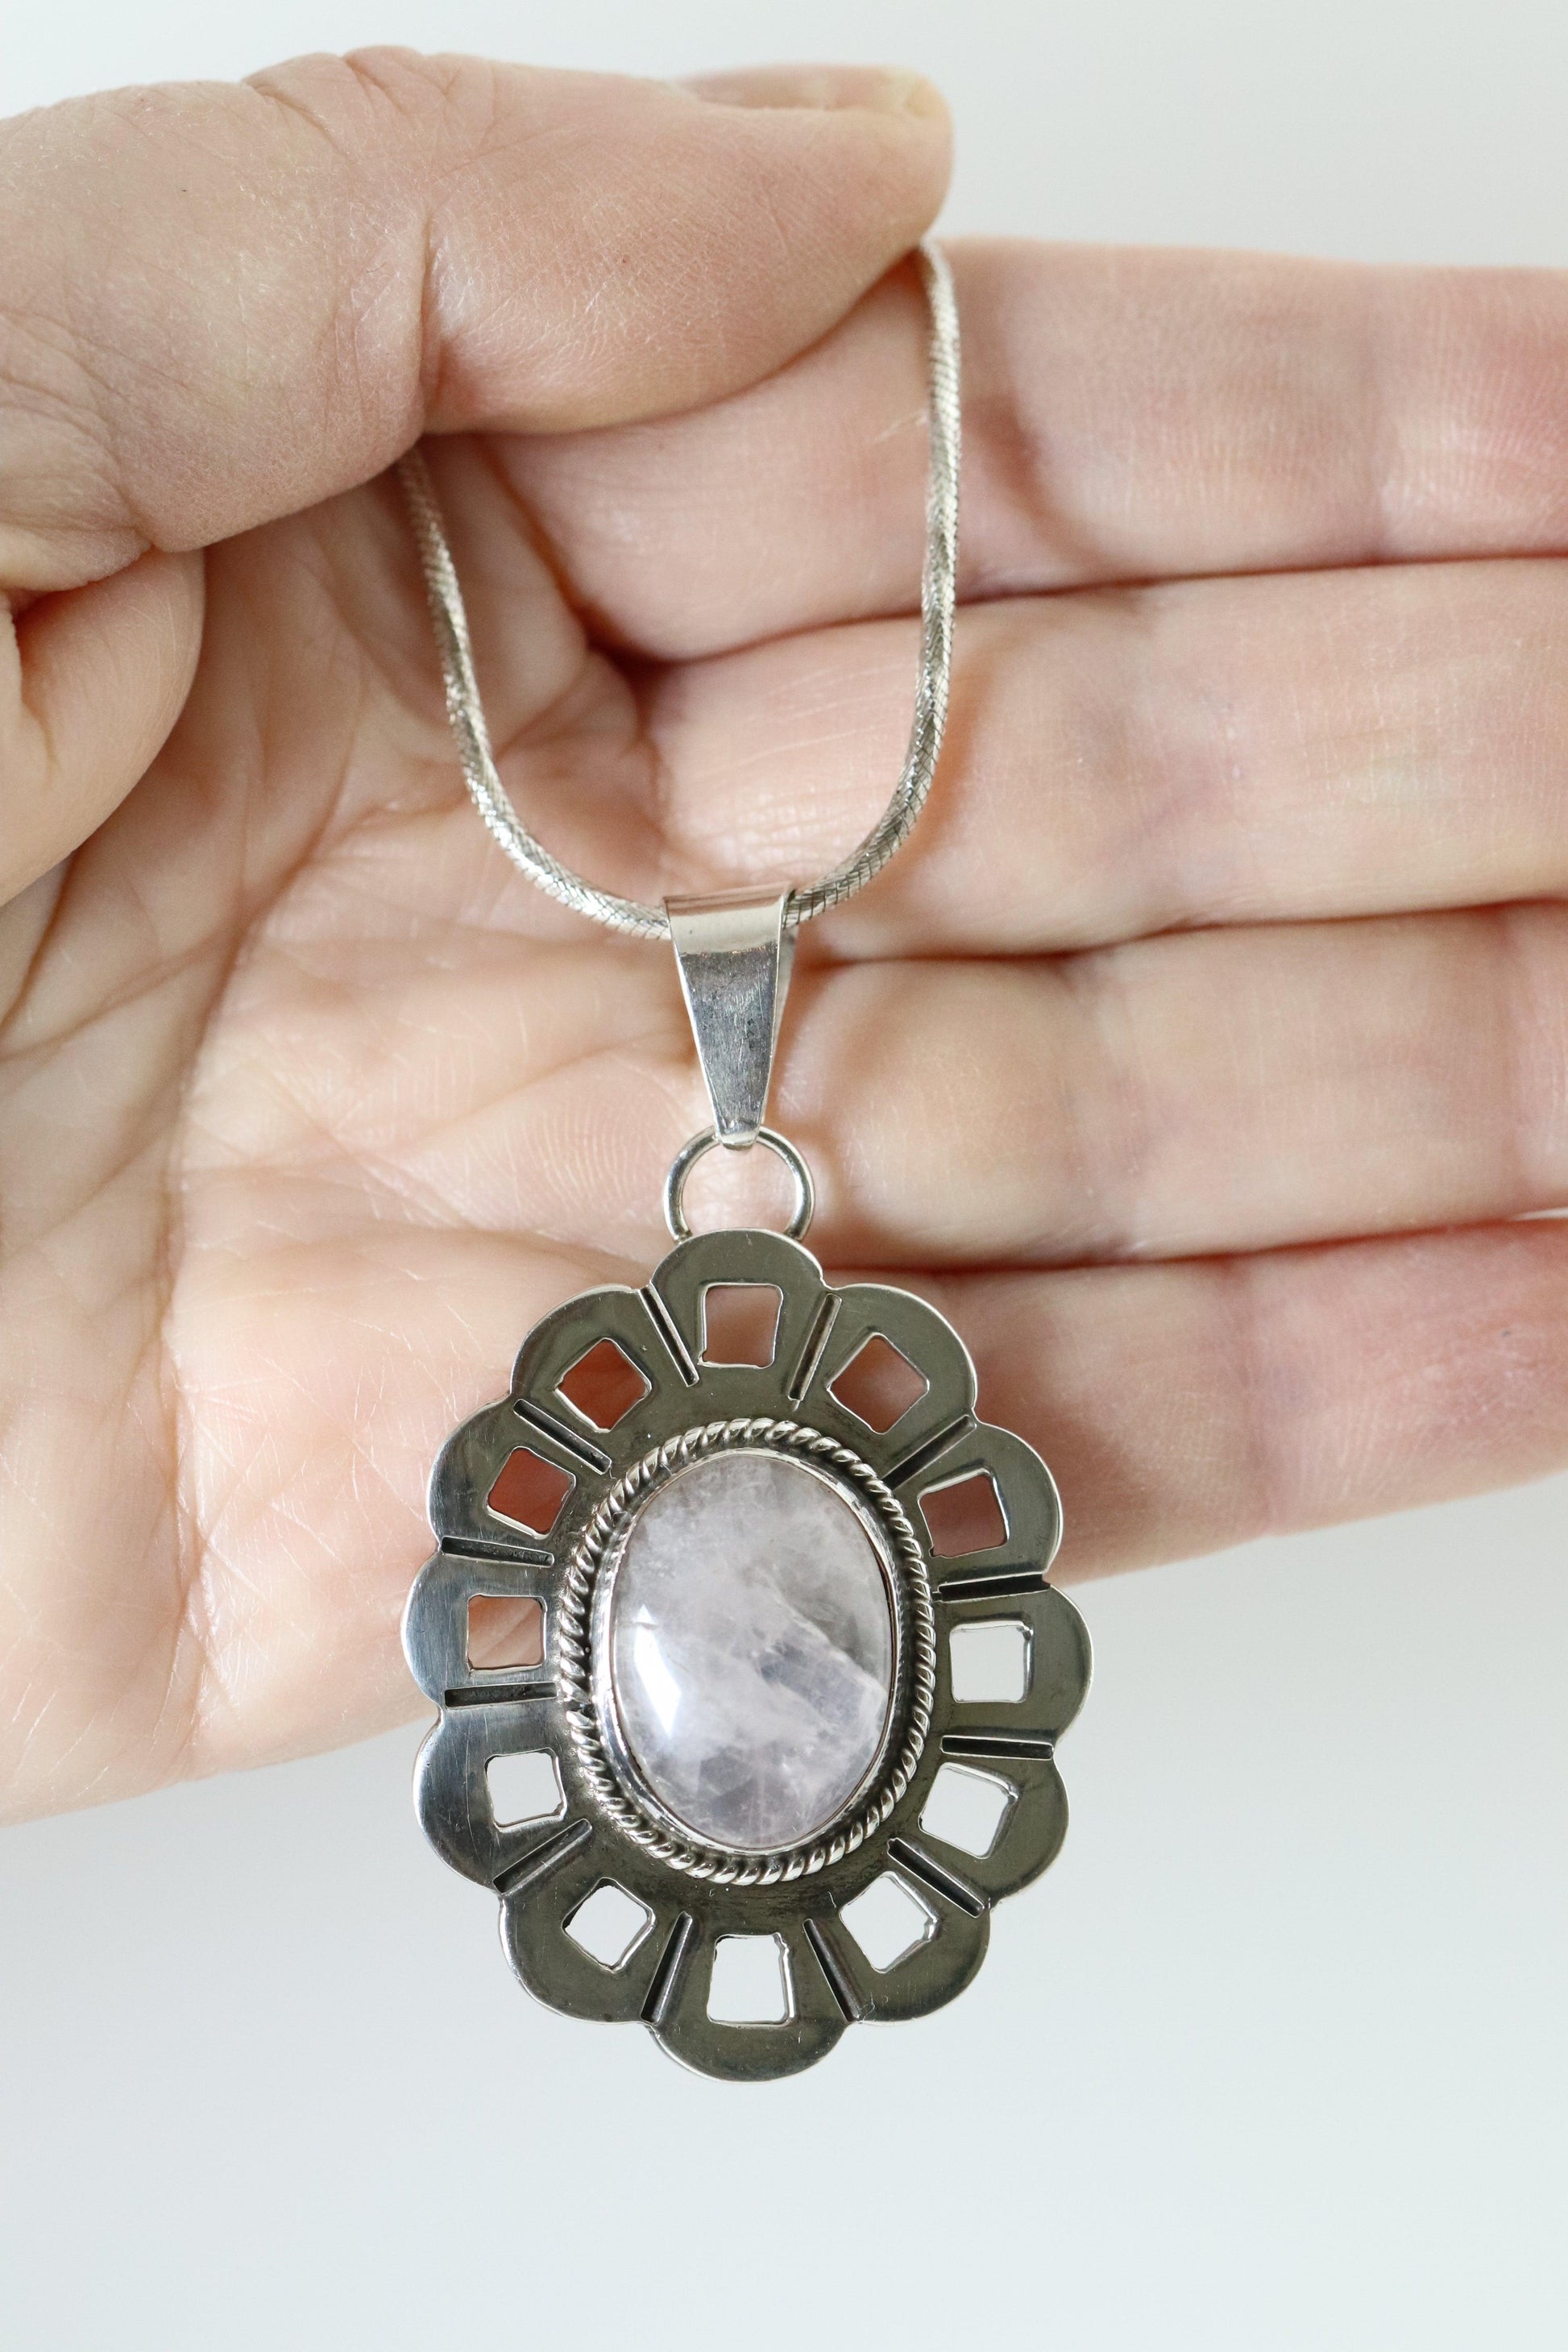 Vintage Taxco Silver Mexican Jewelry | Rose Quartz Handcrafted Pendant Mexico - Carmel Fine Silver Jewelry